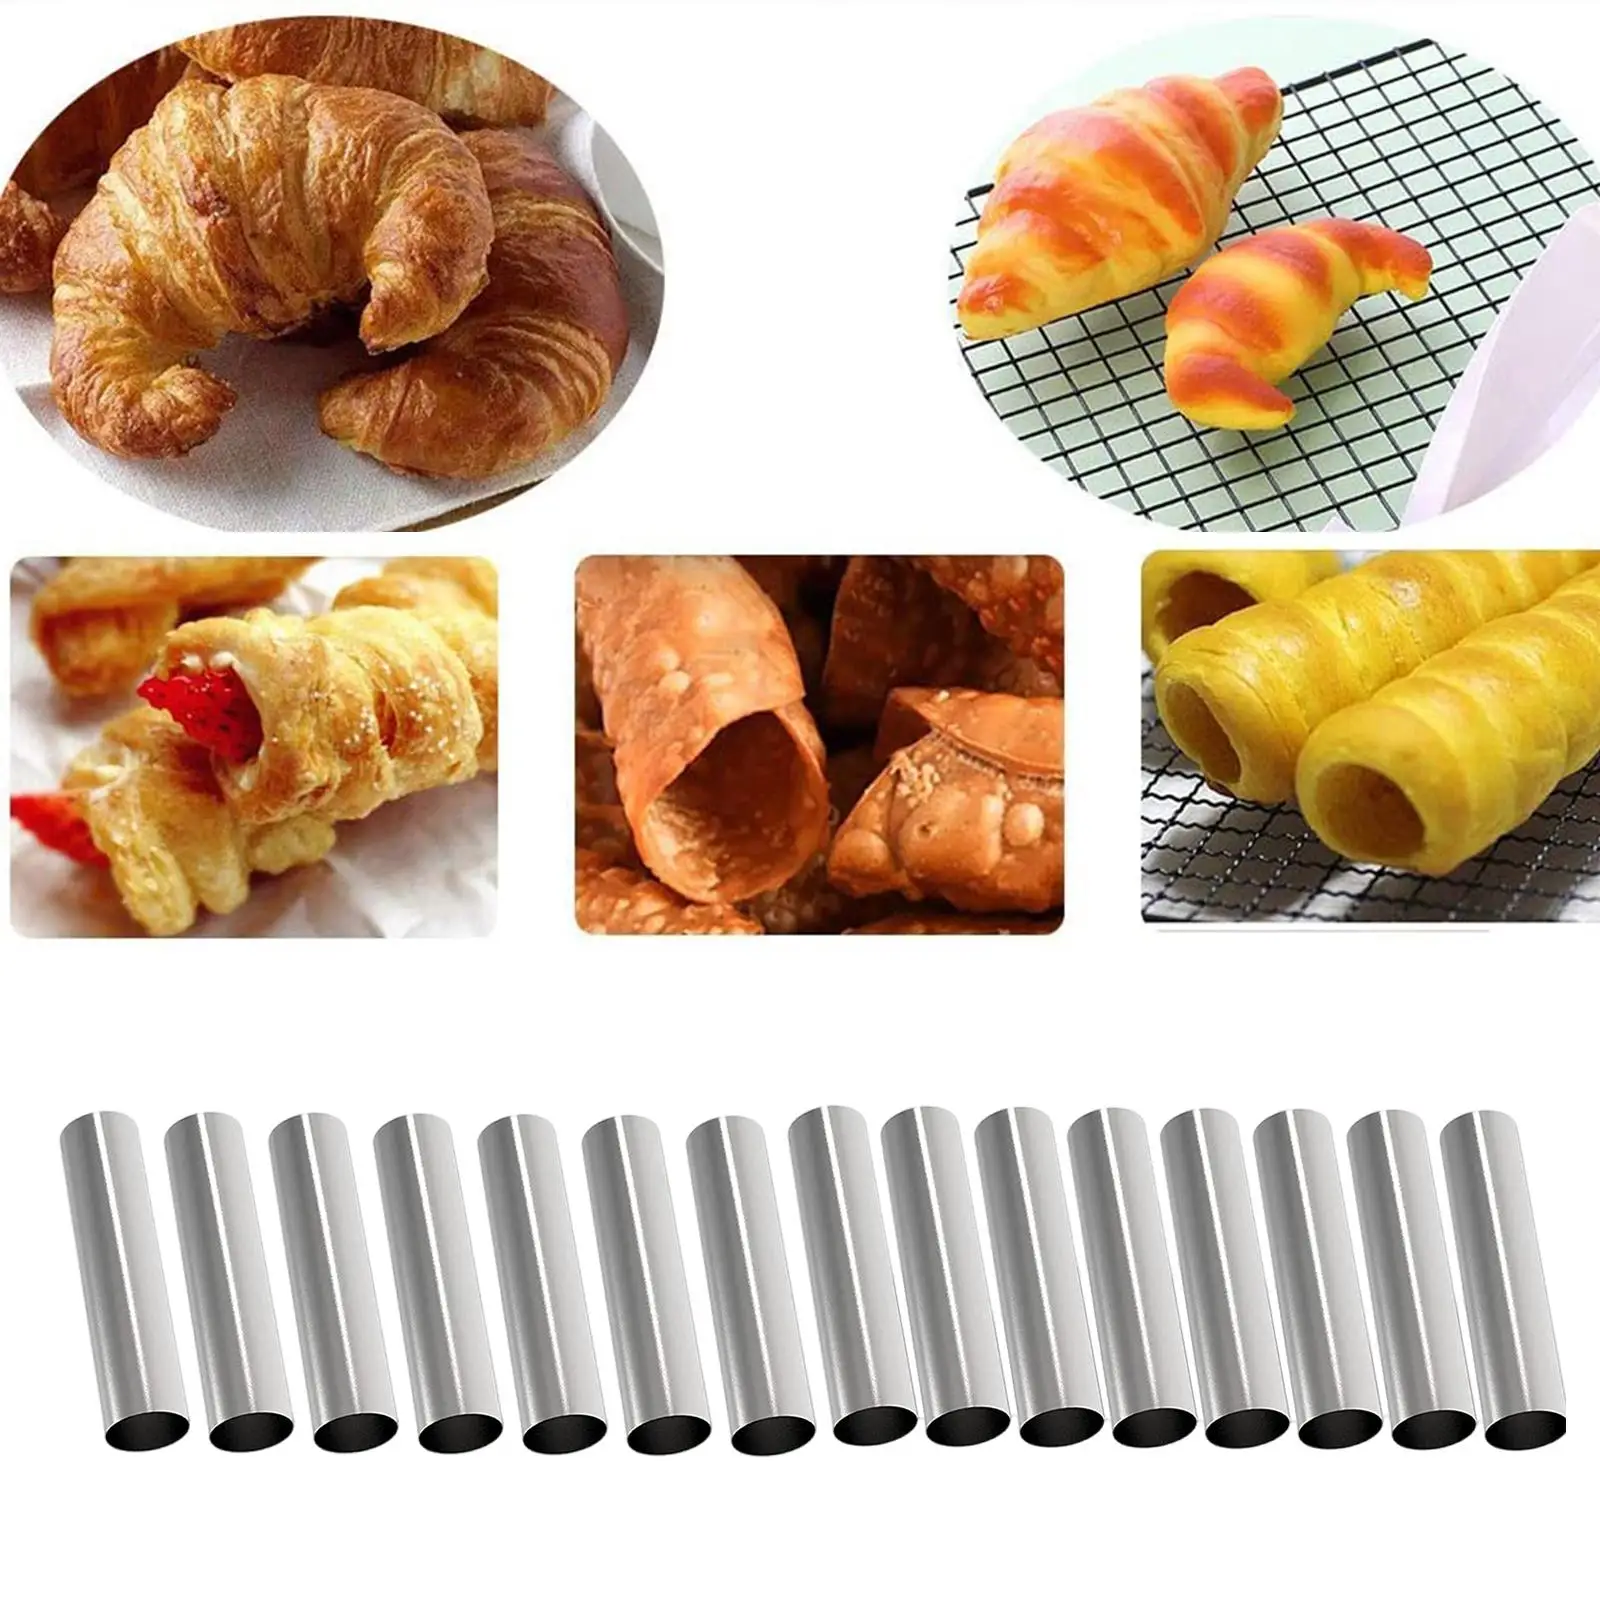 15x Cannoli Form Tubes Baking Tools Cake Horn Mould for Making Butter Horns